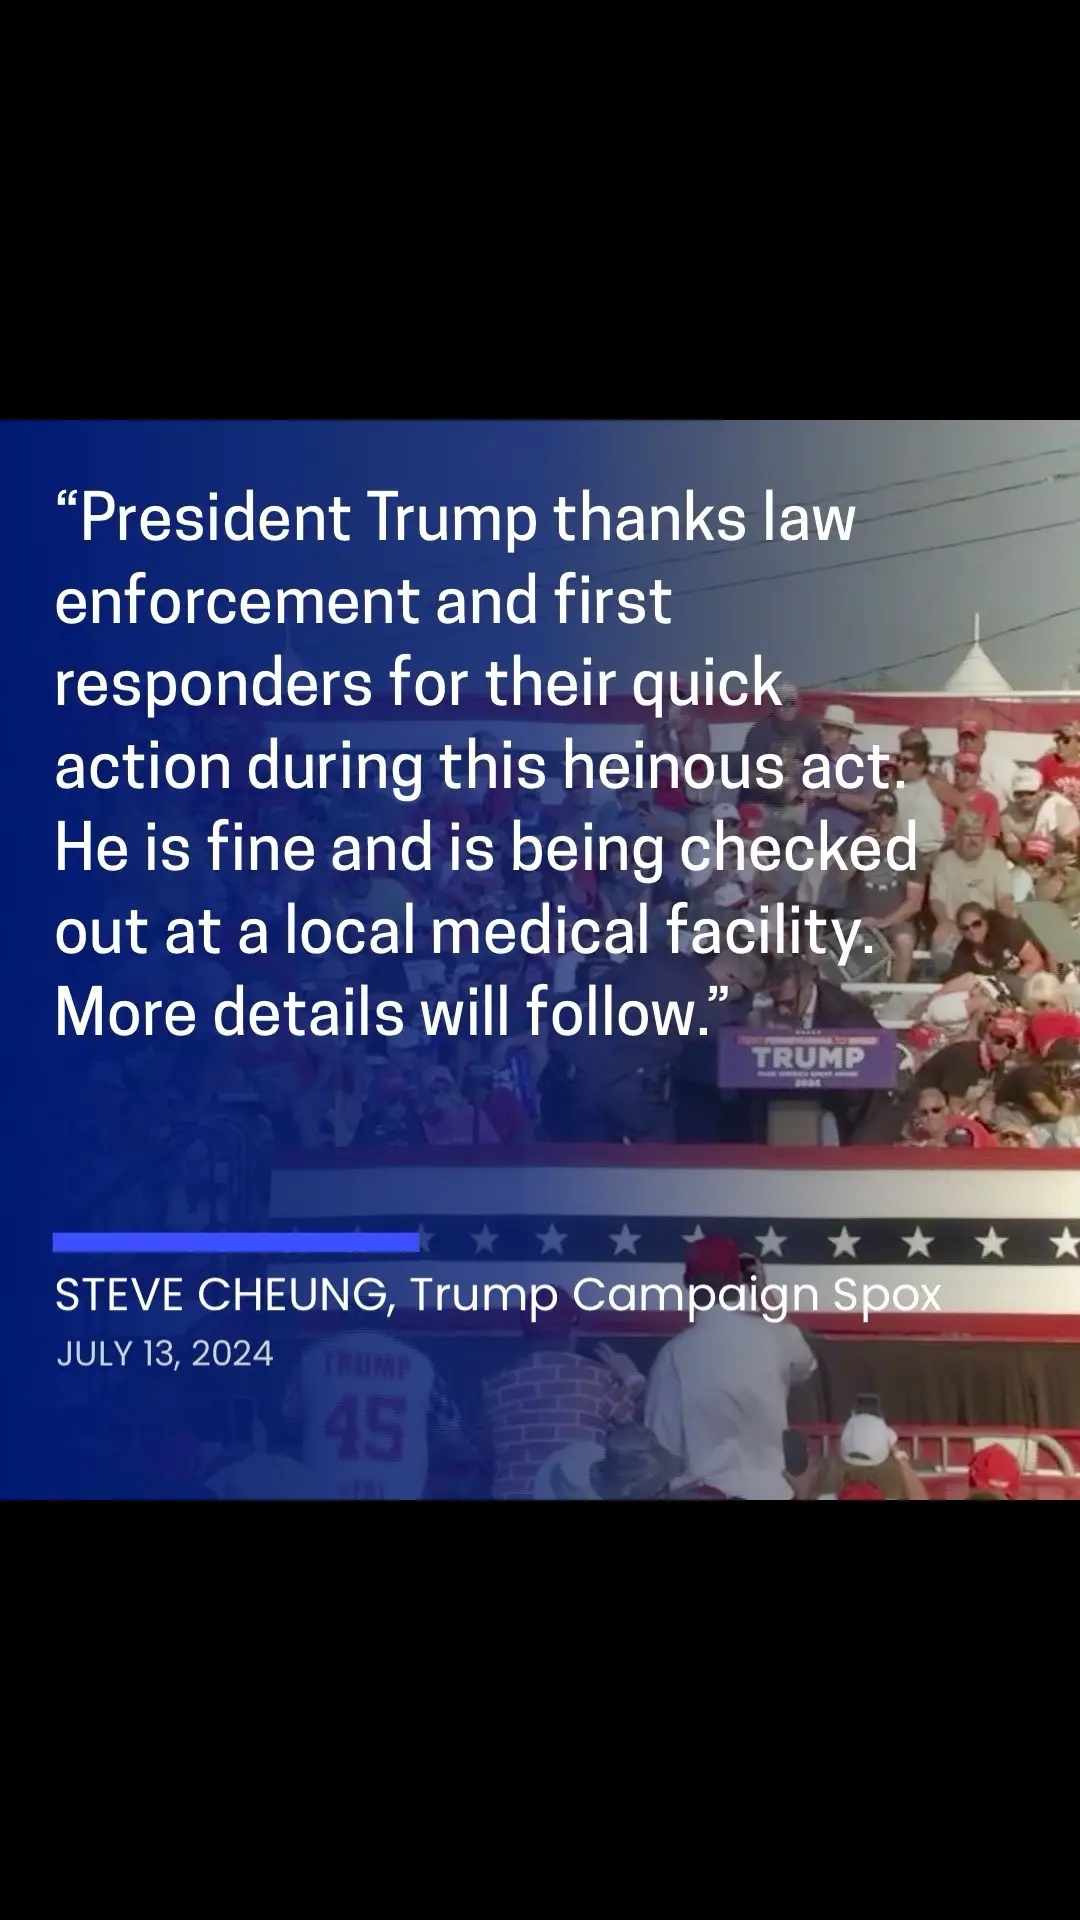 Steven Cheung, spokesperson for the Trump campaign, put out the following statement after former President Trump was rushed offstage during a rally in Butler, Pennsylvania, after a series of gunshots rang out:   “President Trump thanks law enforcement and first responders for their quick action during this heinous act. He is fine and is being checked out at a local medical facility. More details will follow.” #trump #cspan